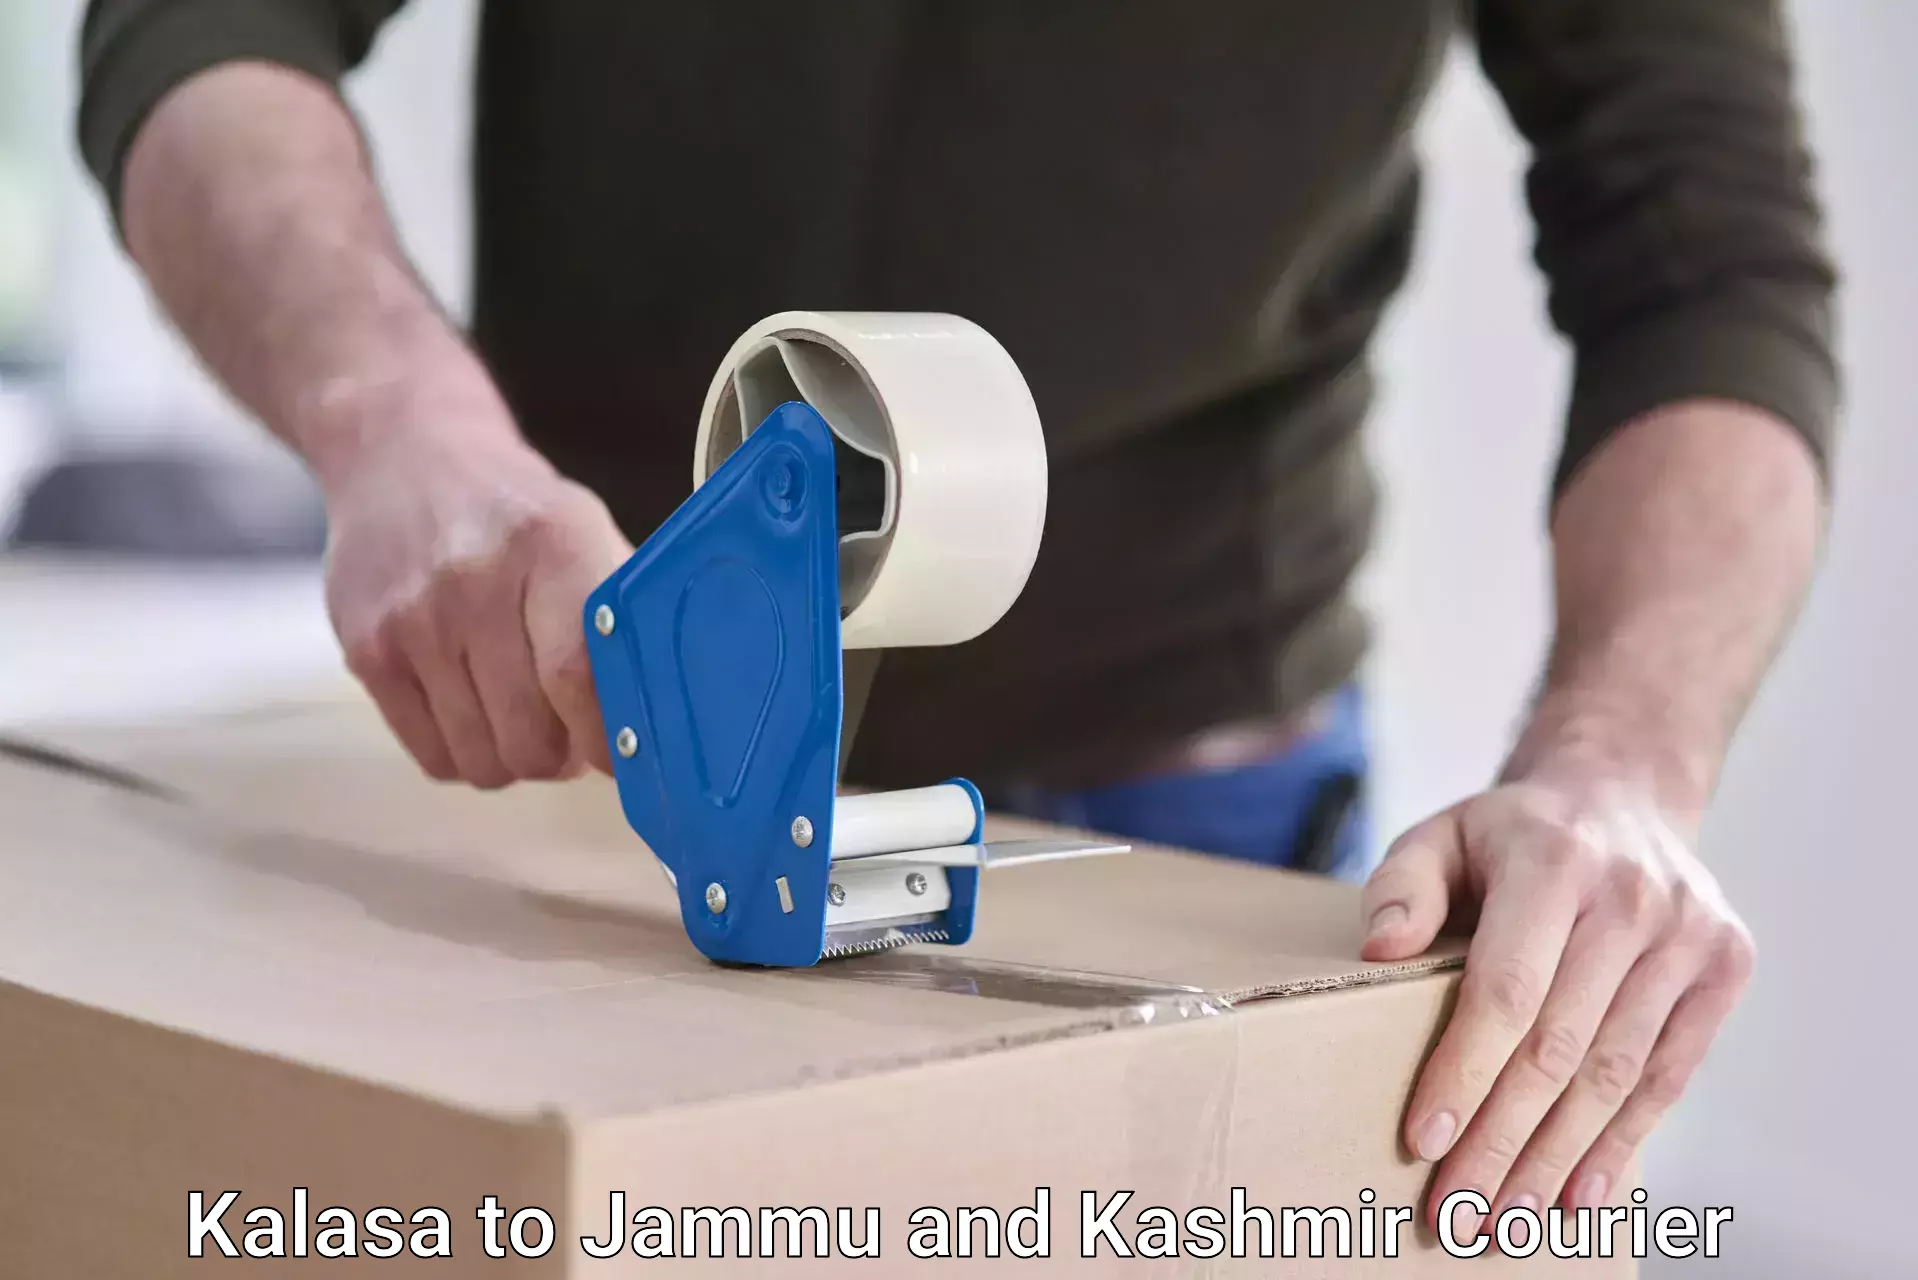 Nationwide shipping coverage in Kalasa to Jammu and Kashmir